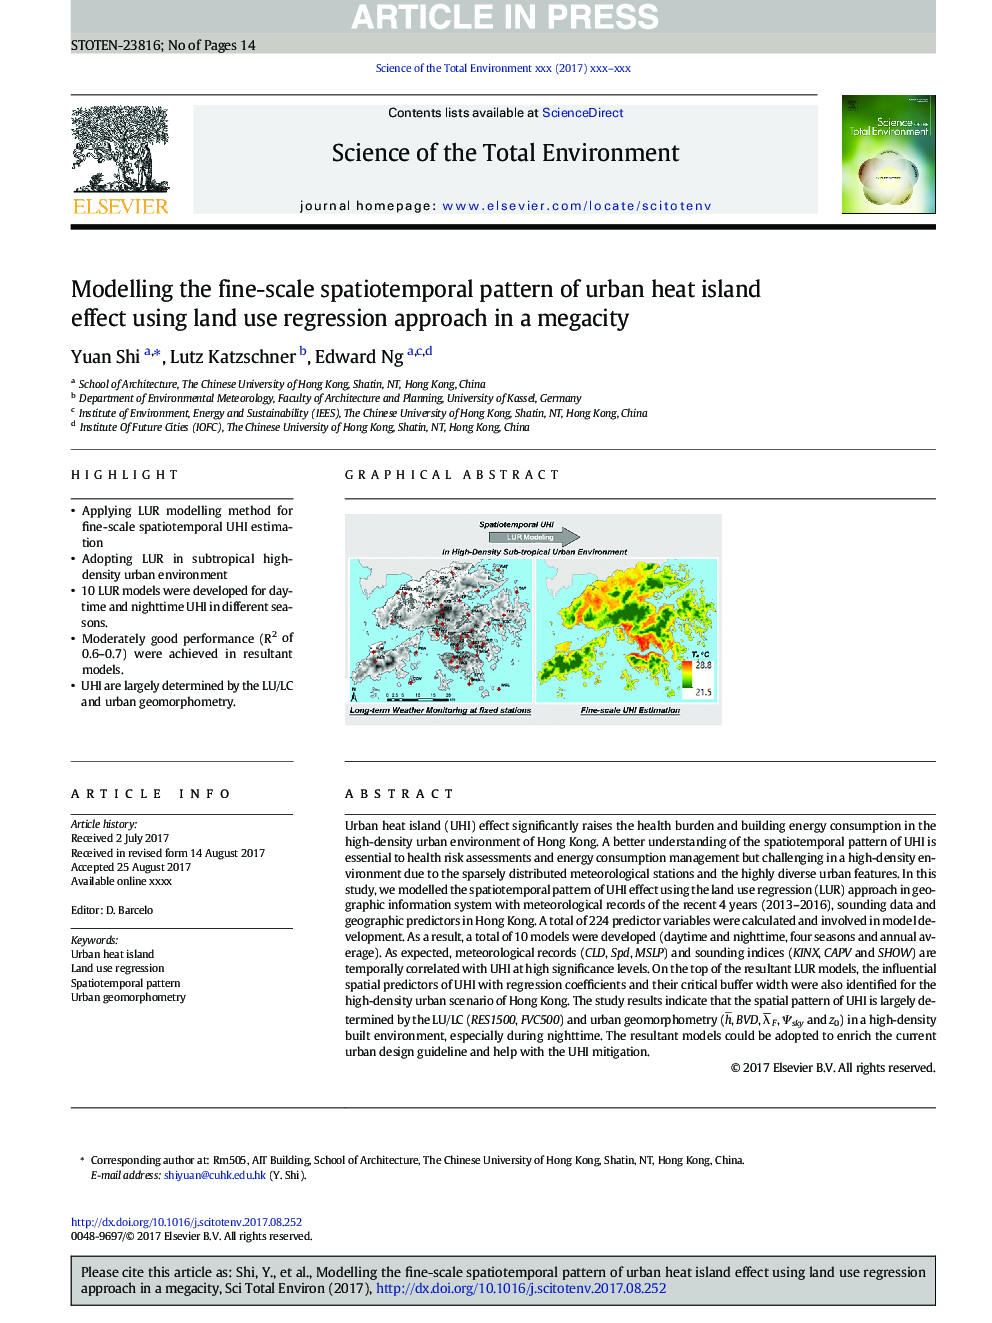 Modelling the fine-scale spatiotemporal pattern of urban heat island effect using land use regression approach in a megacity